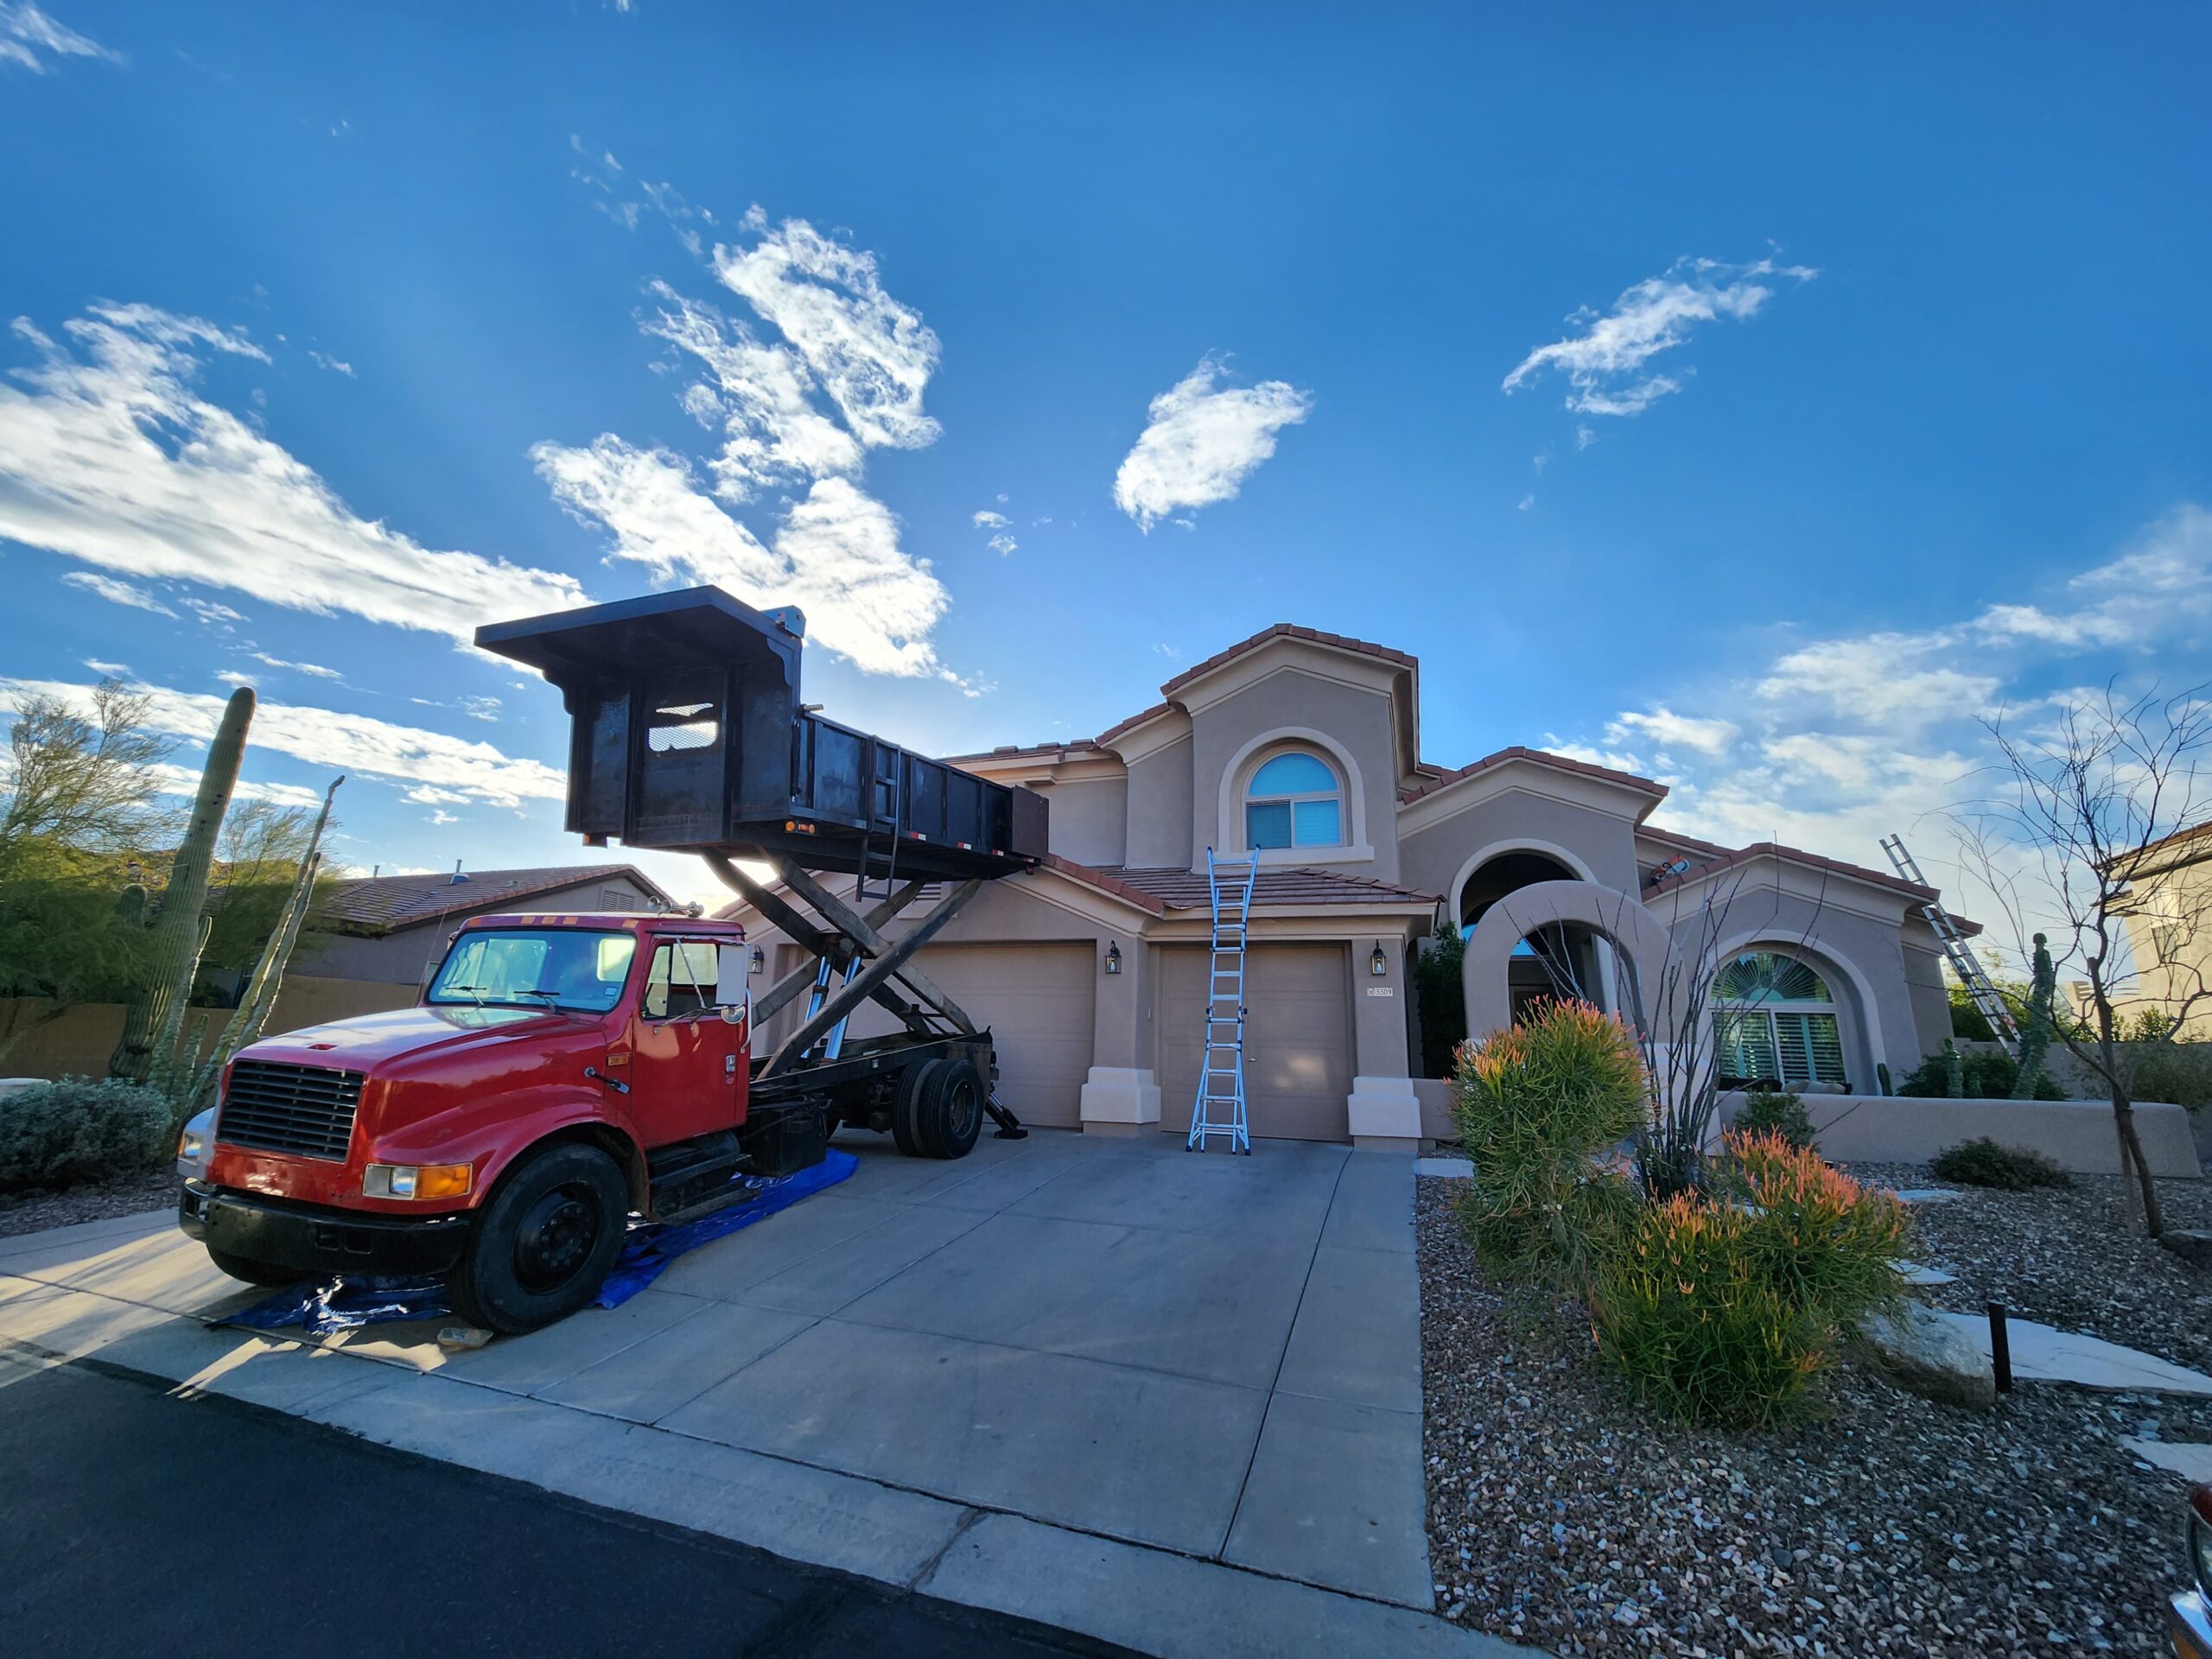 A red truck is parked in front of a house in North Phoenix during re roof.